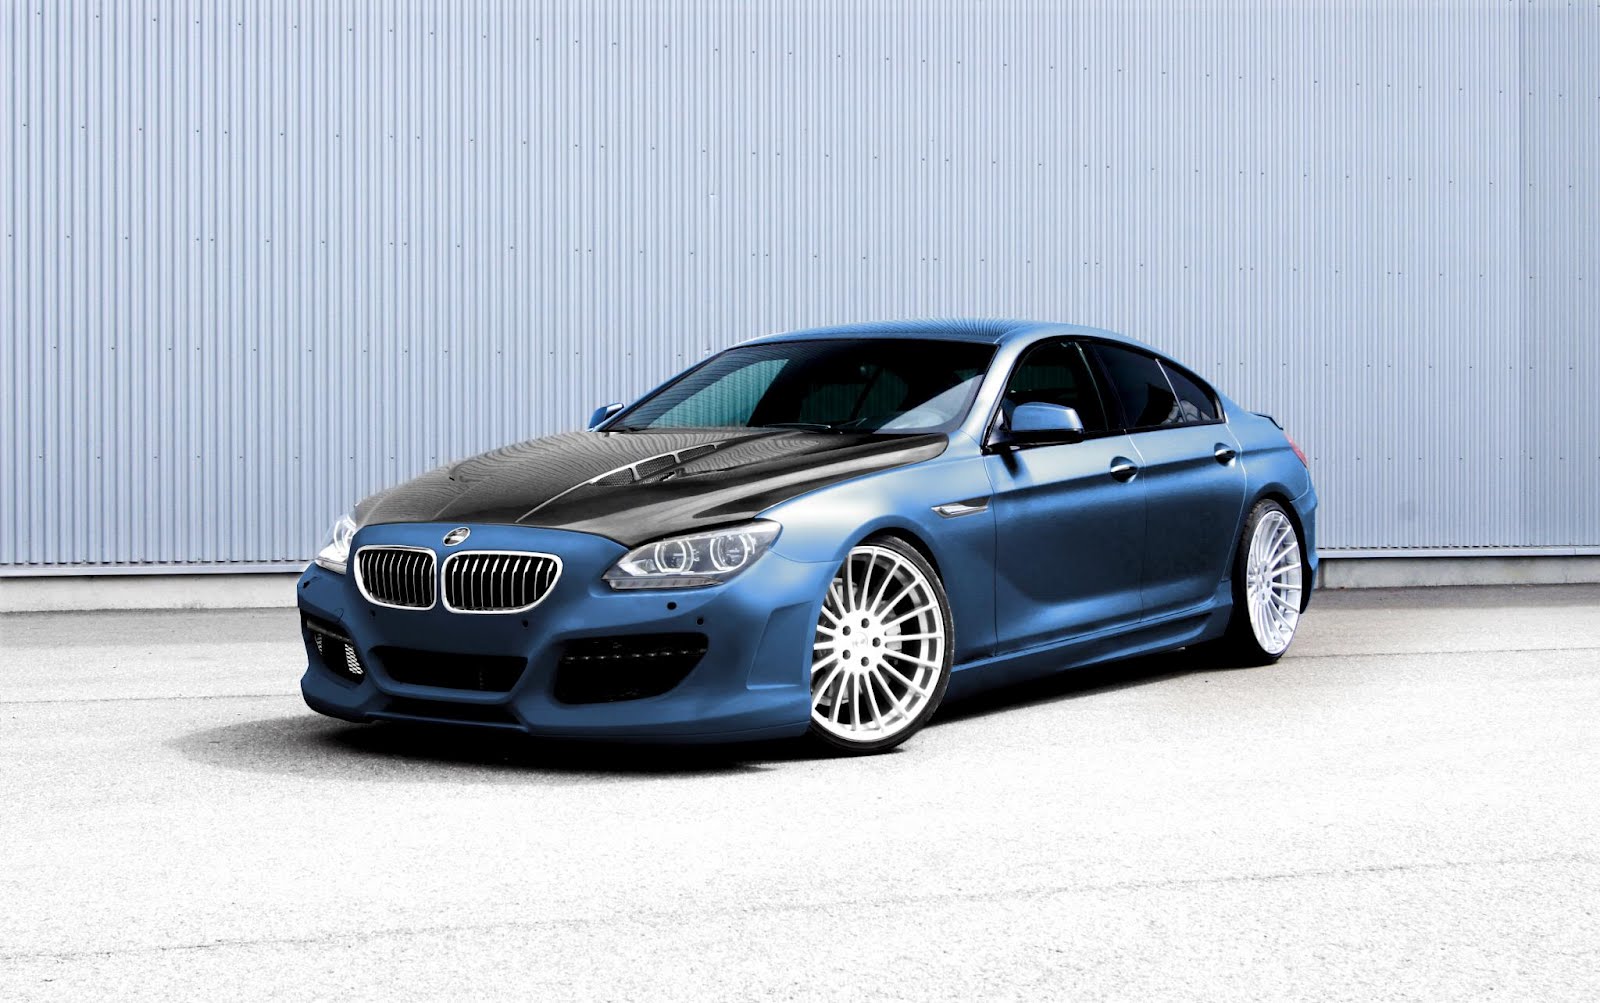 Hamann previews tuning program for BMW 6 Series Gran Coupe